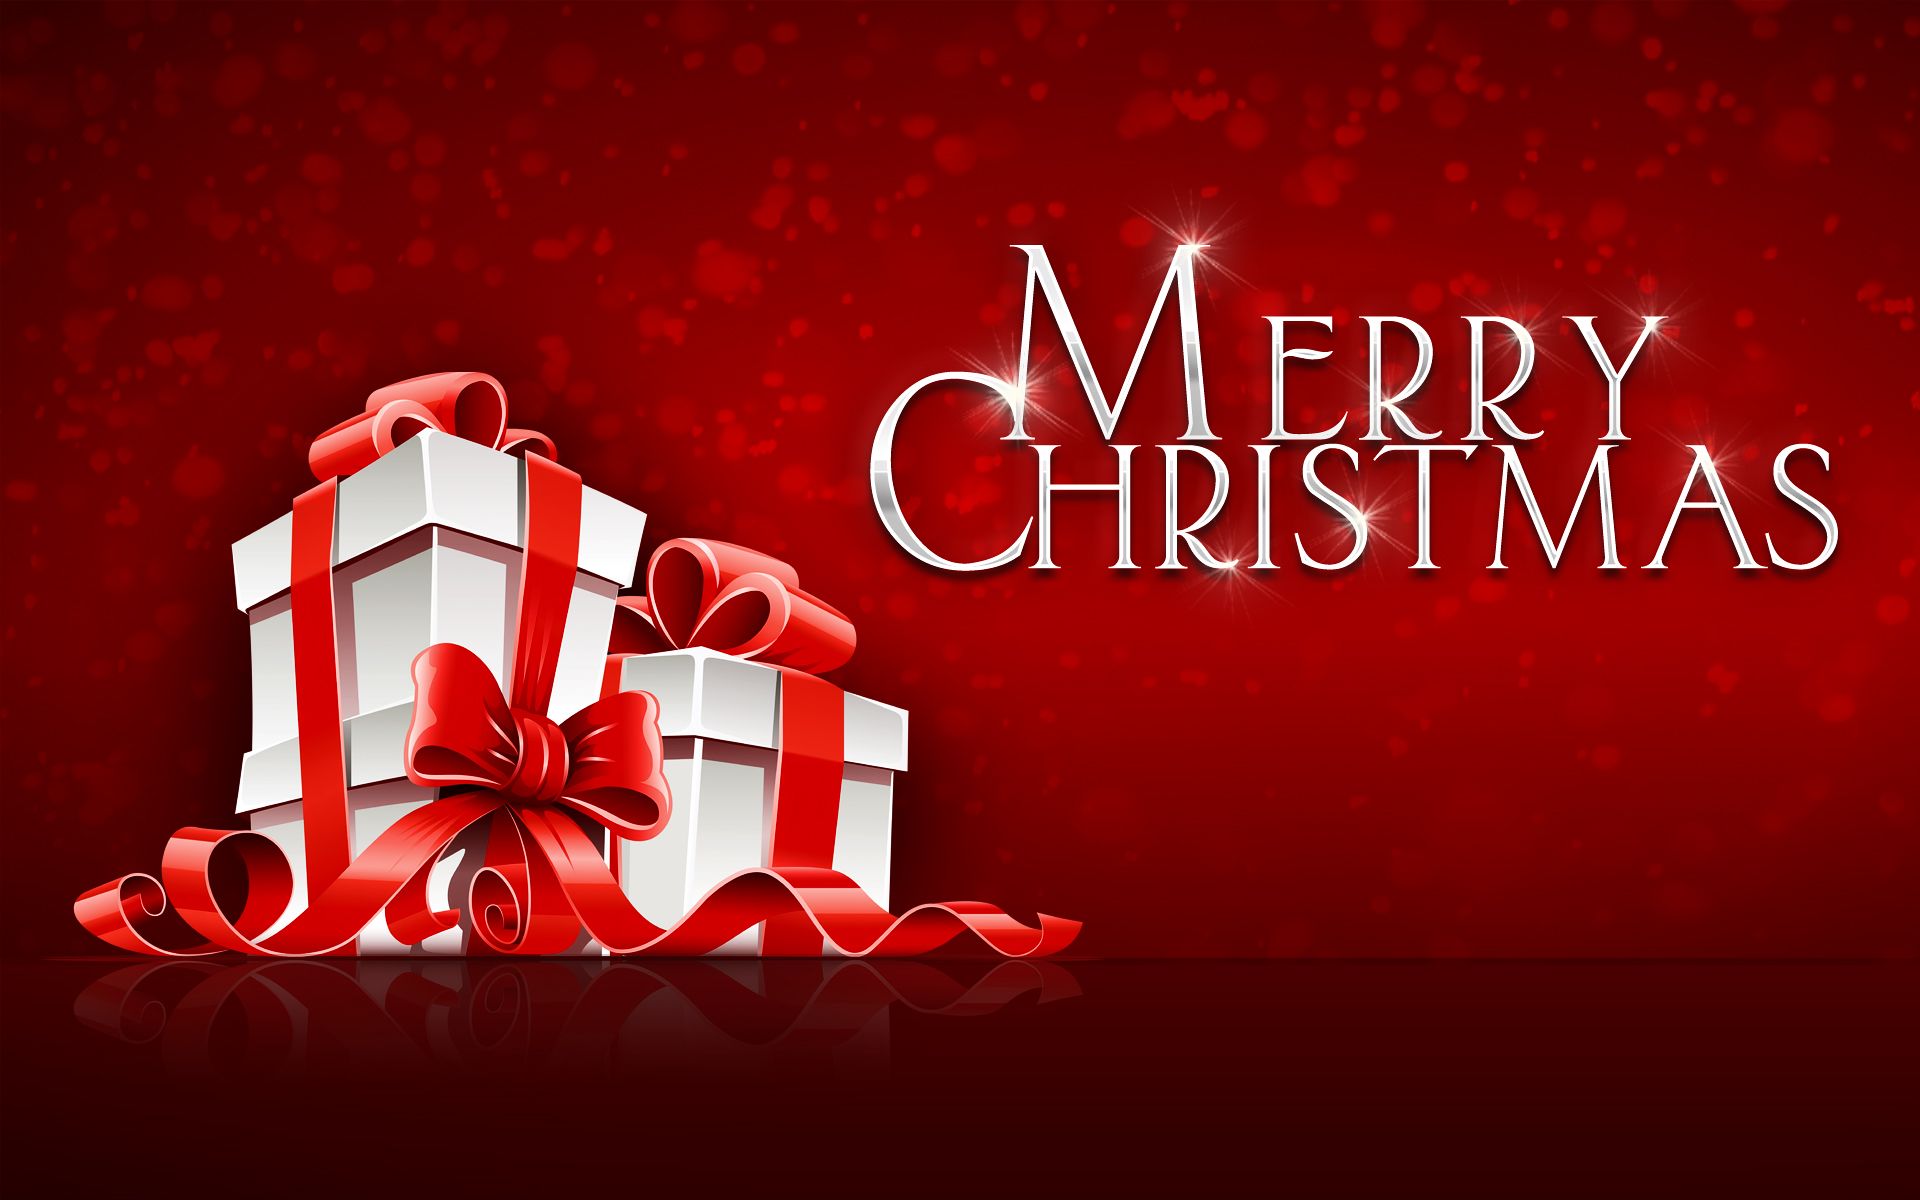 2014 Merry Christmas Wallpapers | HD Wallpapers